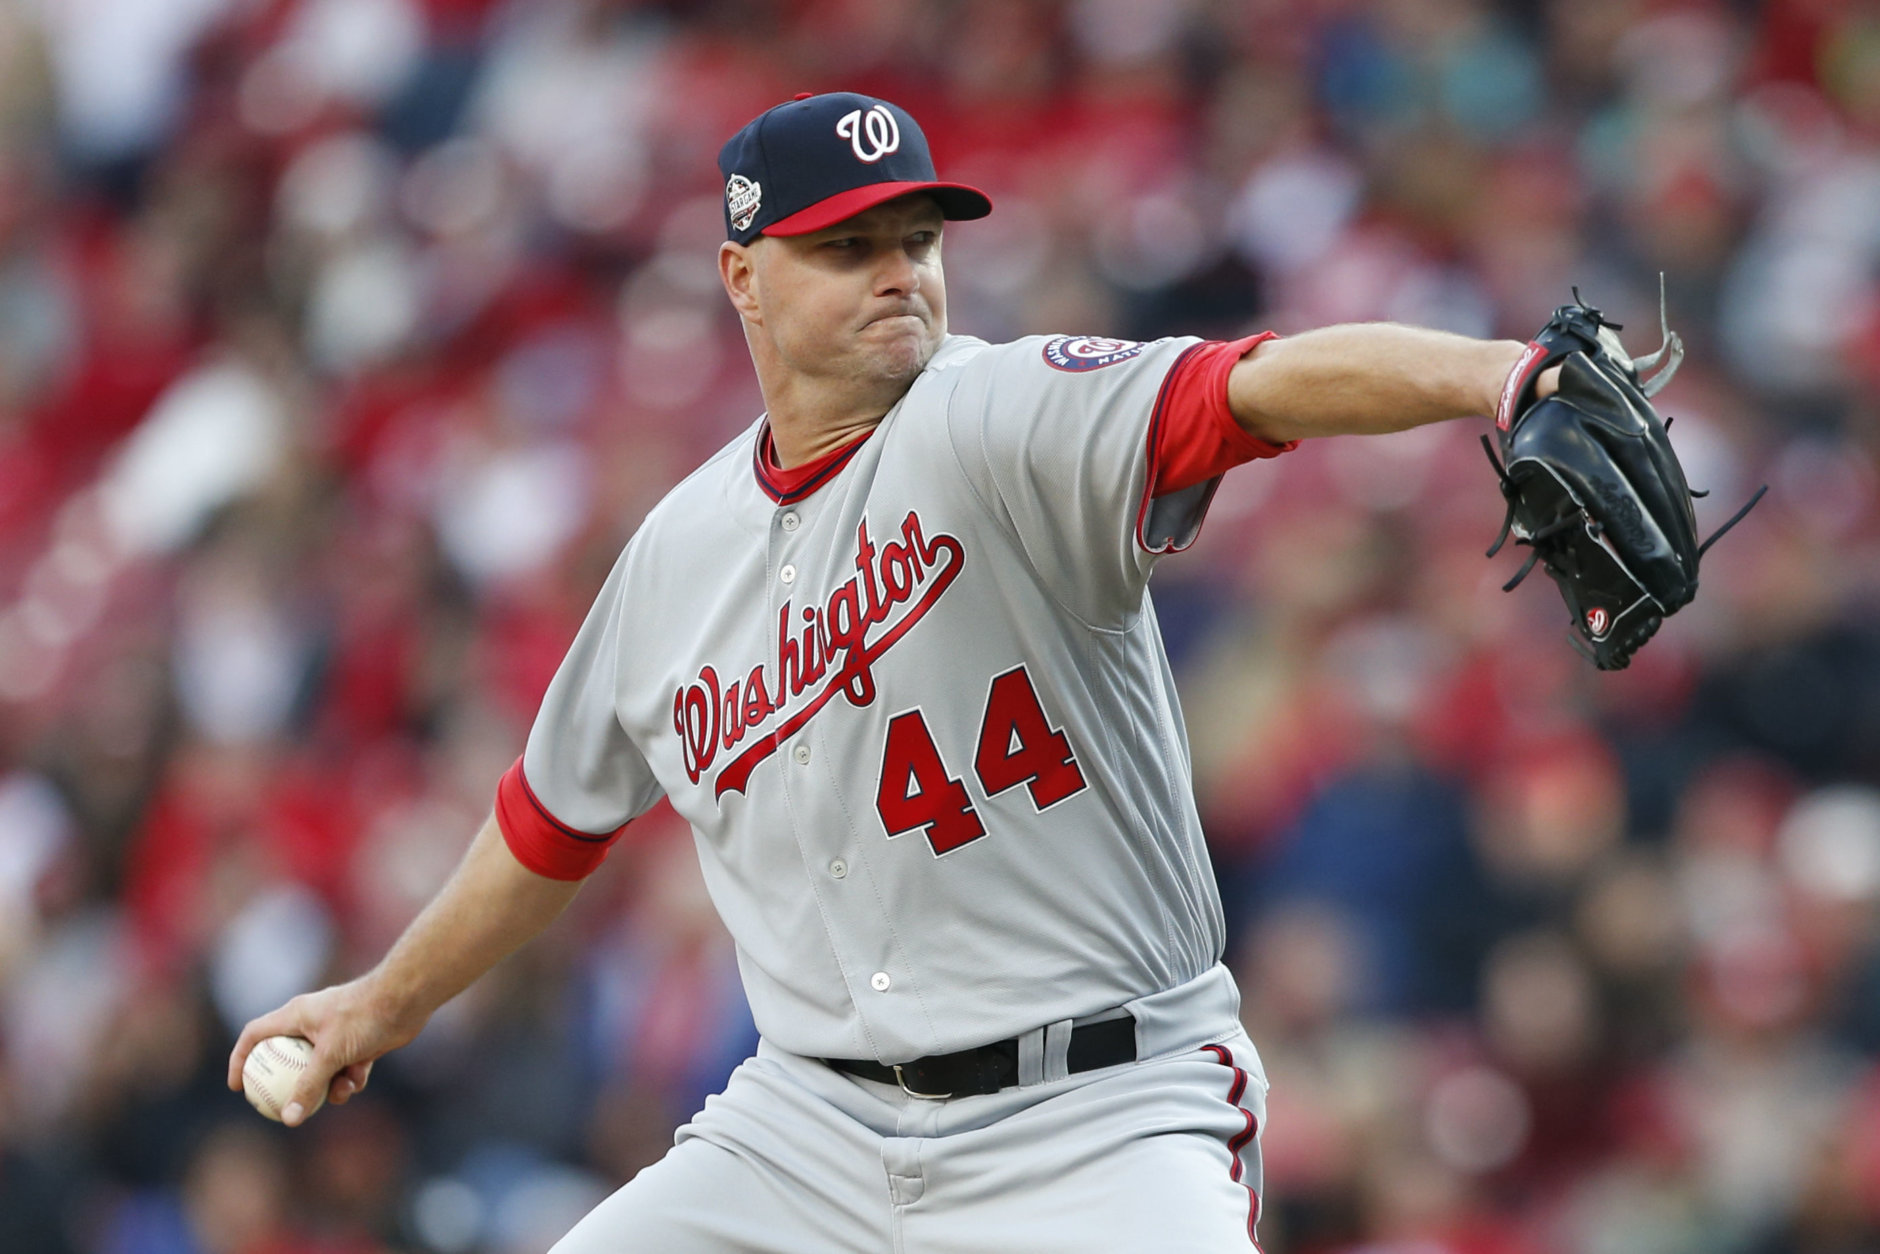 Washington Nationals relief pitcher Ryan Madson throws in the eighth inning of an opening day baseball game against the Cincinnati Reds, Friday, March 30, 2018, in Cincinnati. (AP Photo/Gary Landers)